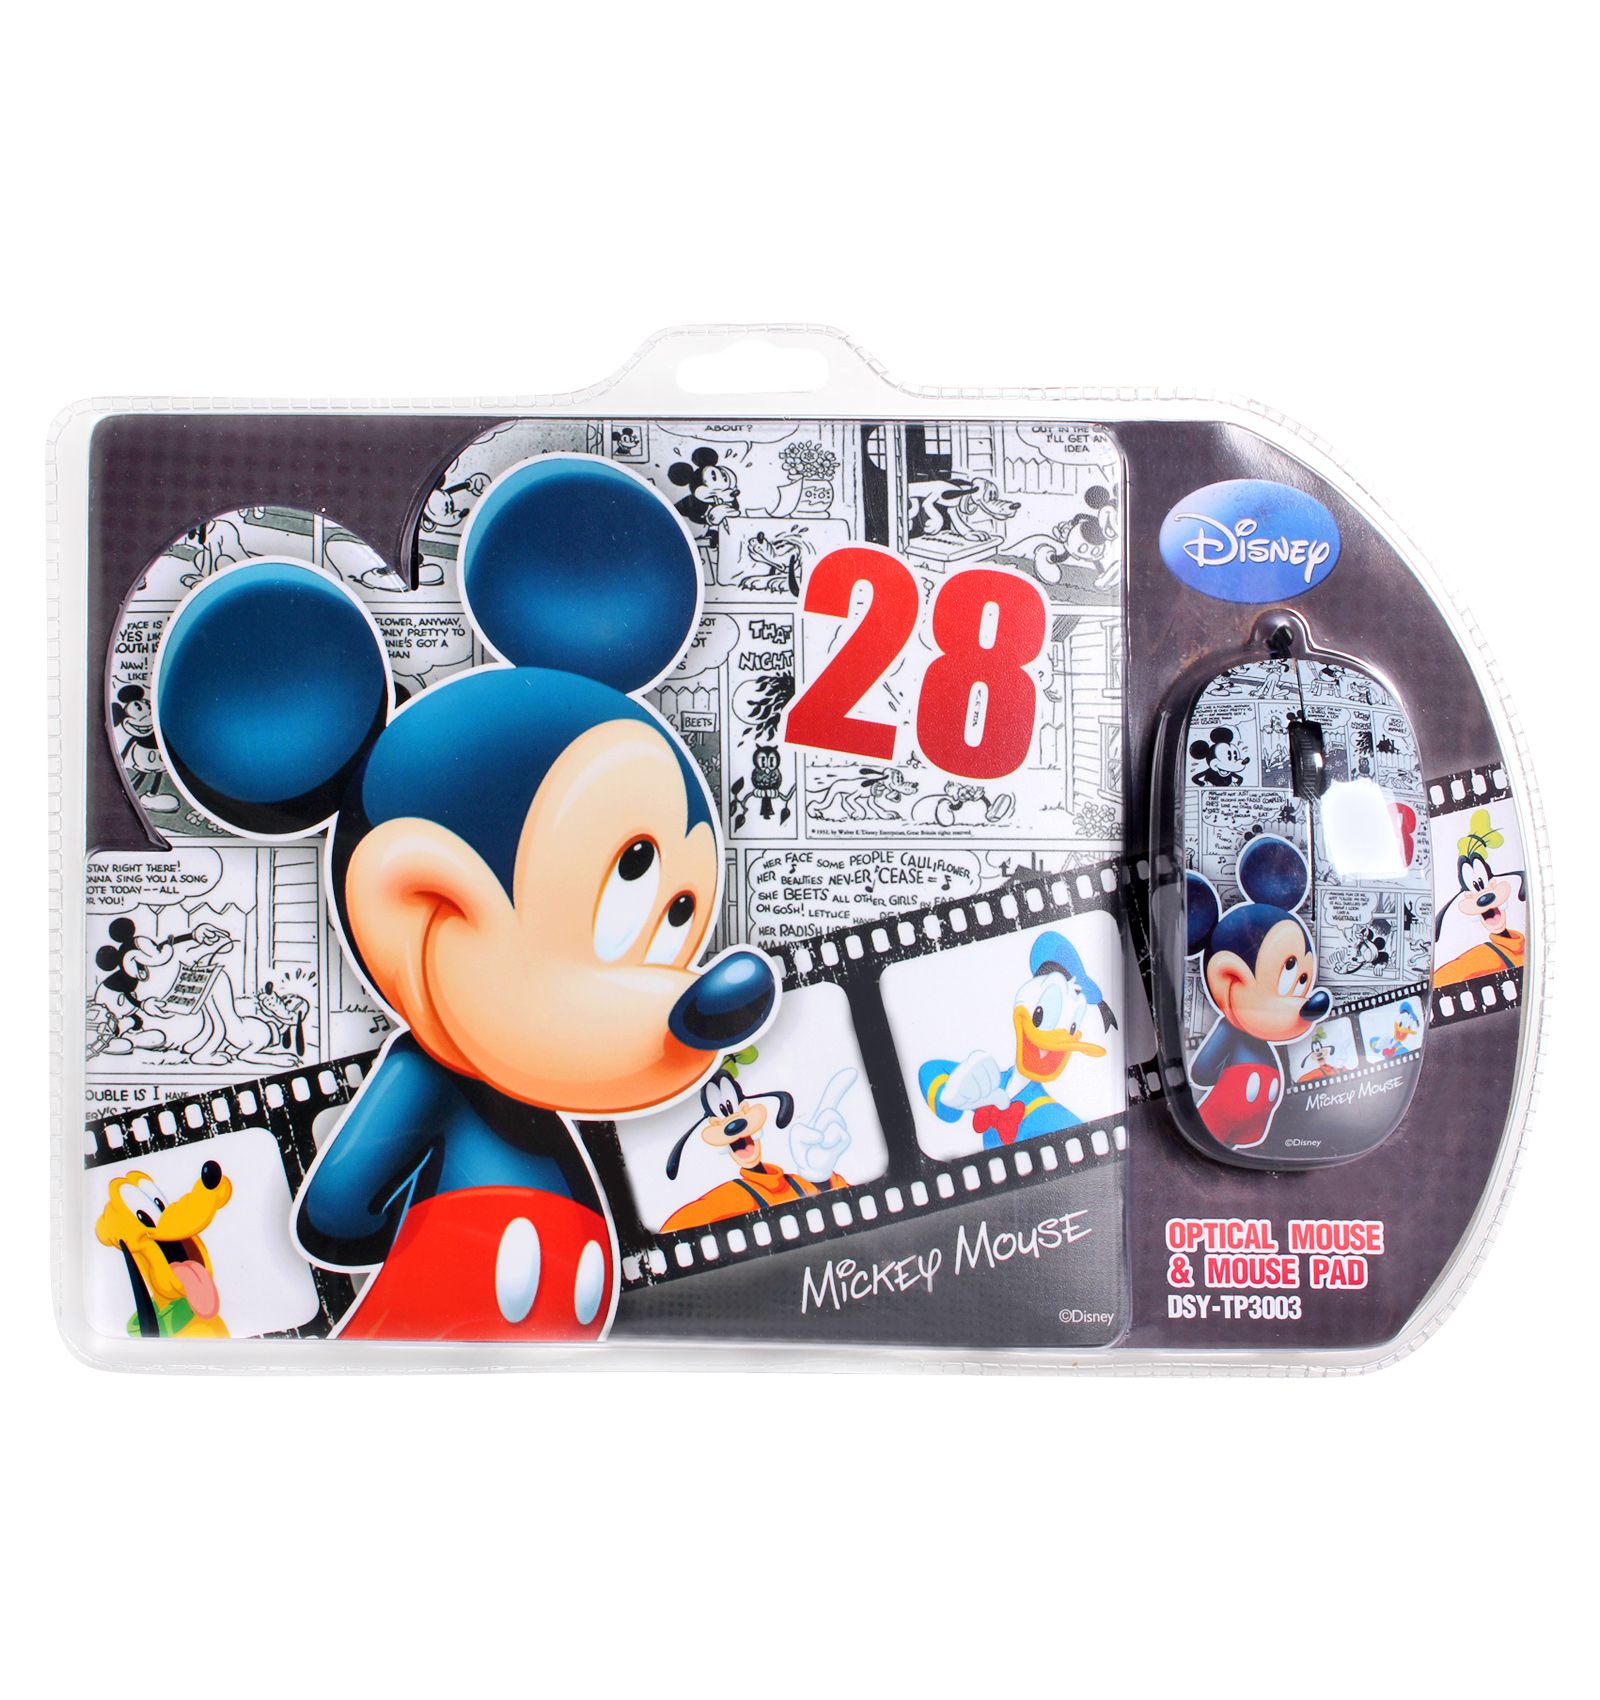 Disney - Mickey Mouse - Optical Mouse & Mouse Pad